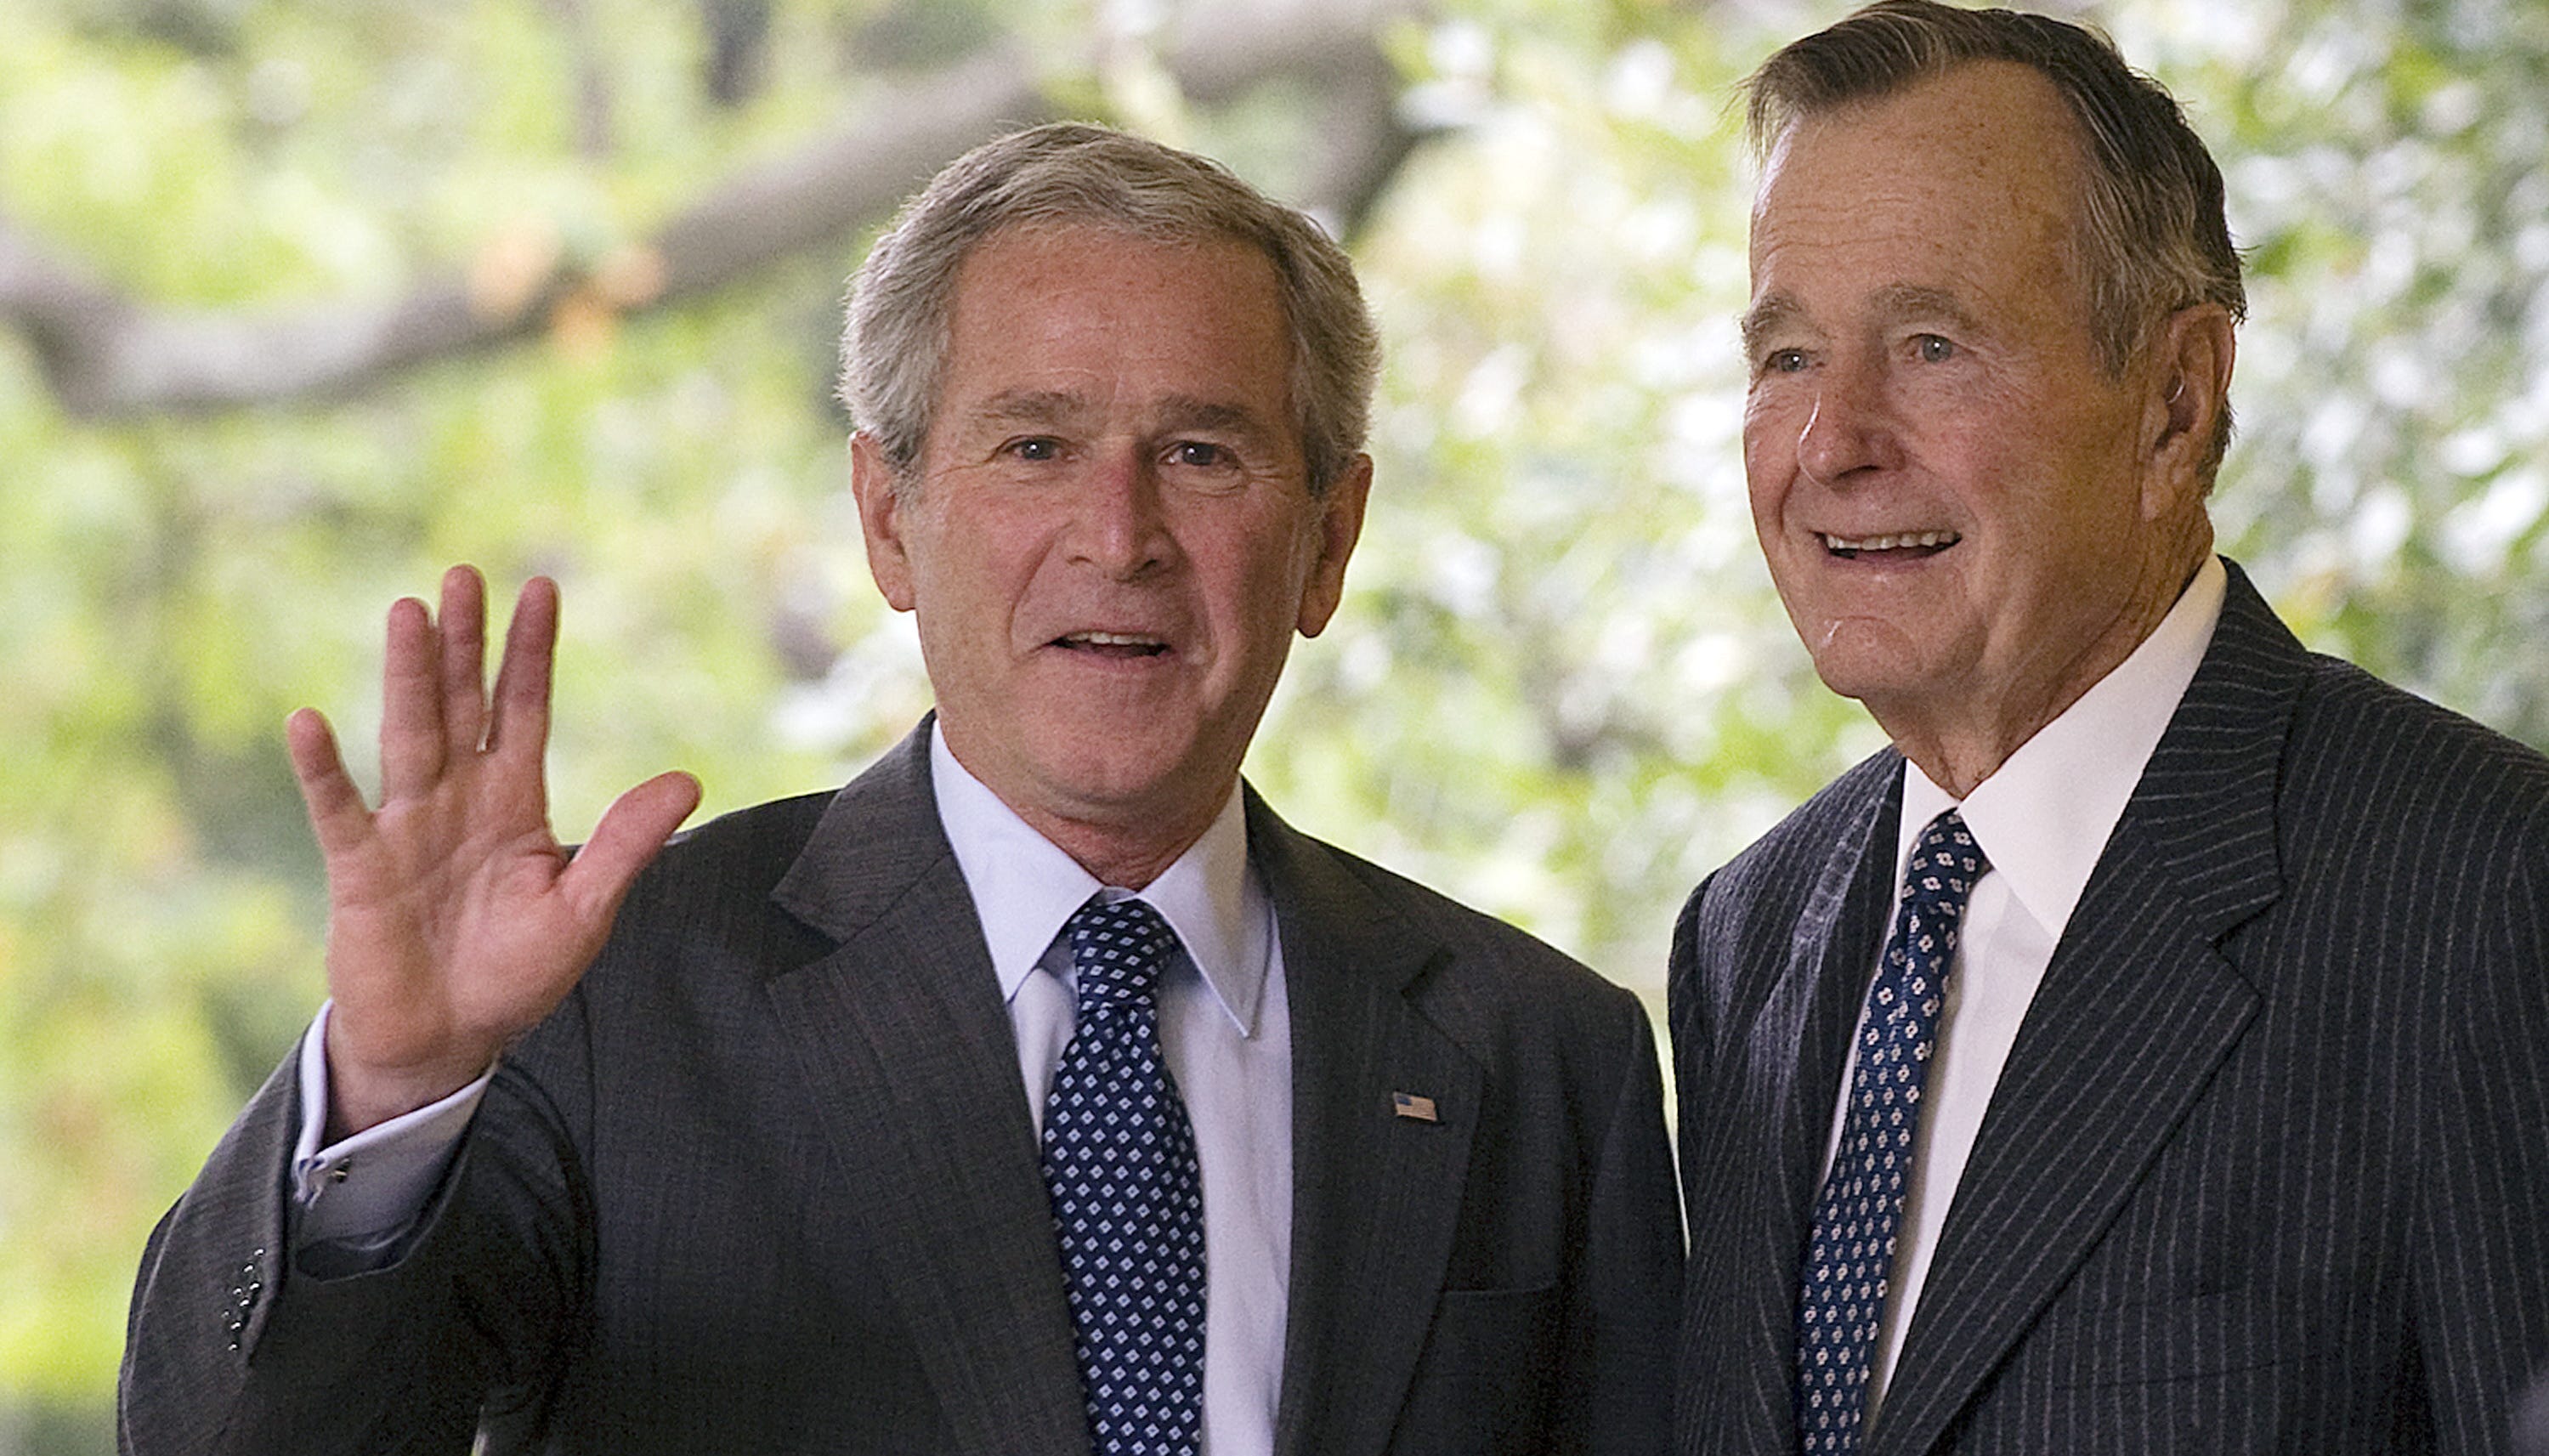 george-h-w-bush-and-george-w-bush-love-and-a-bit-of-a-rivalry